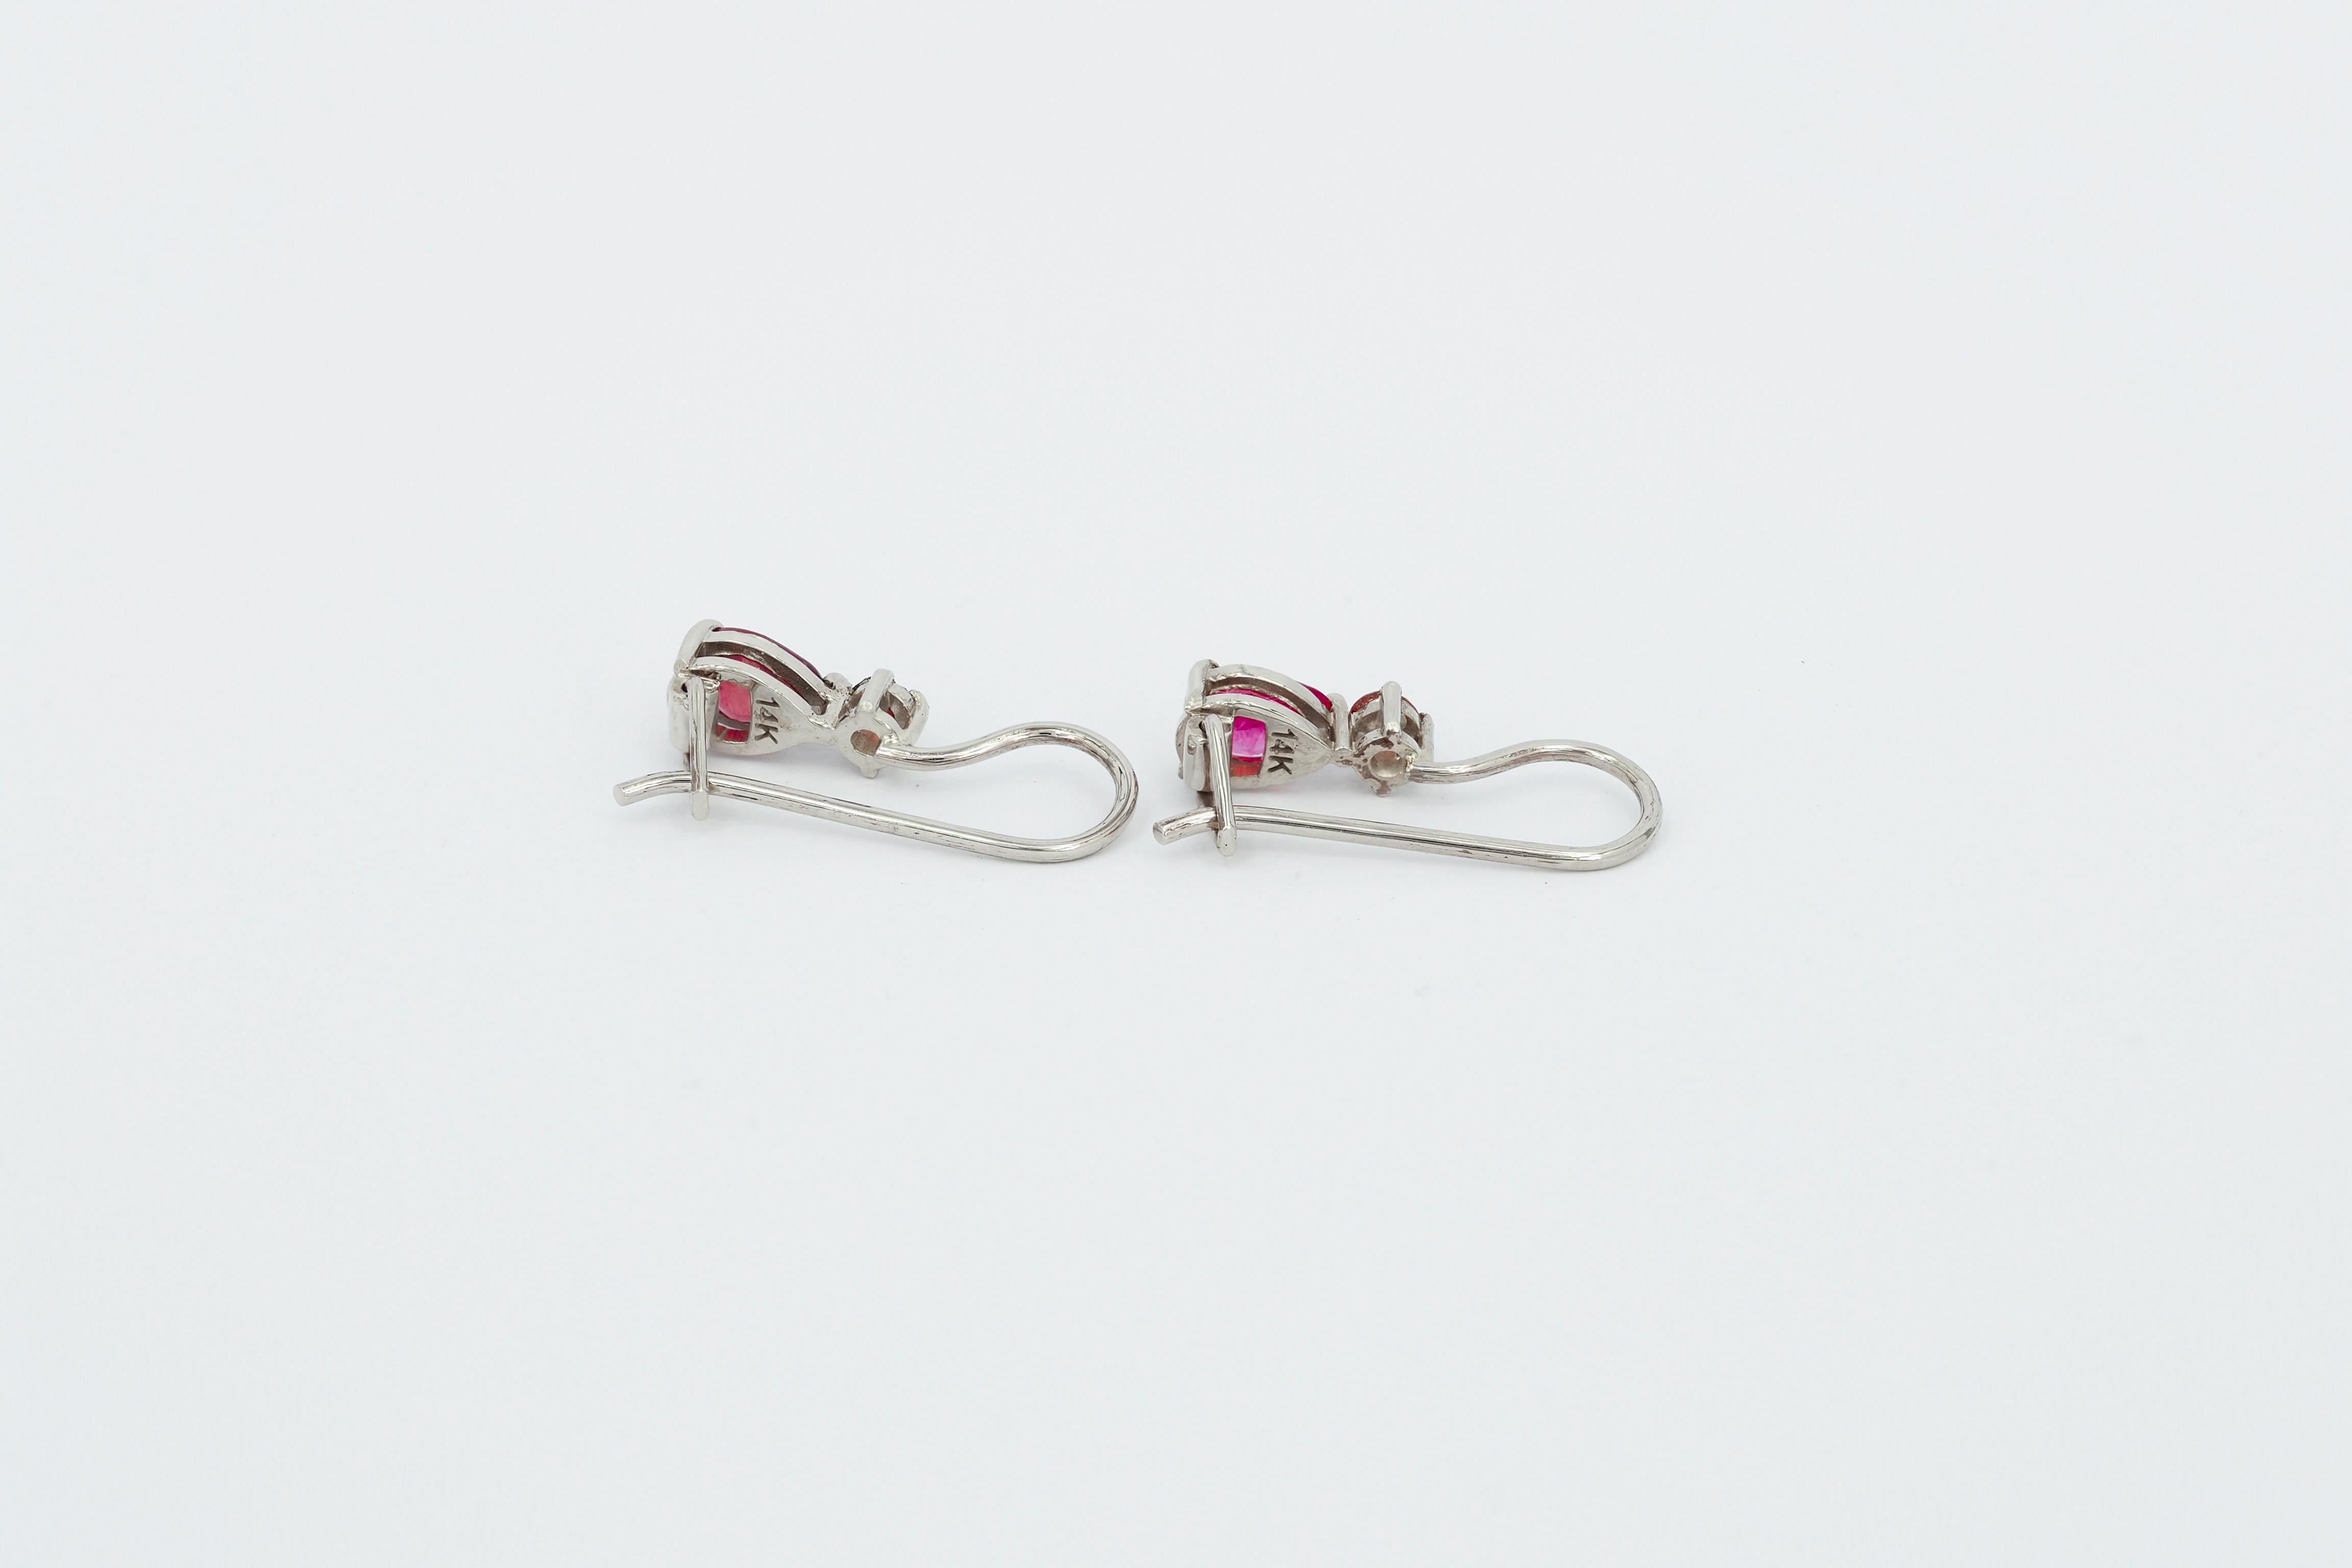 Women's Genuine 1 ct rubies and sapphires earrings.  For Sale